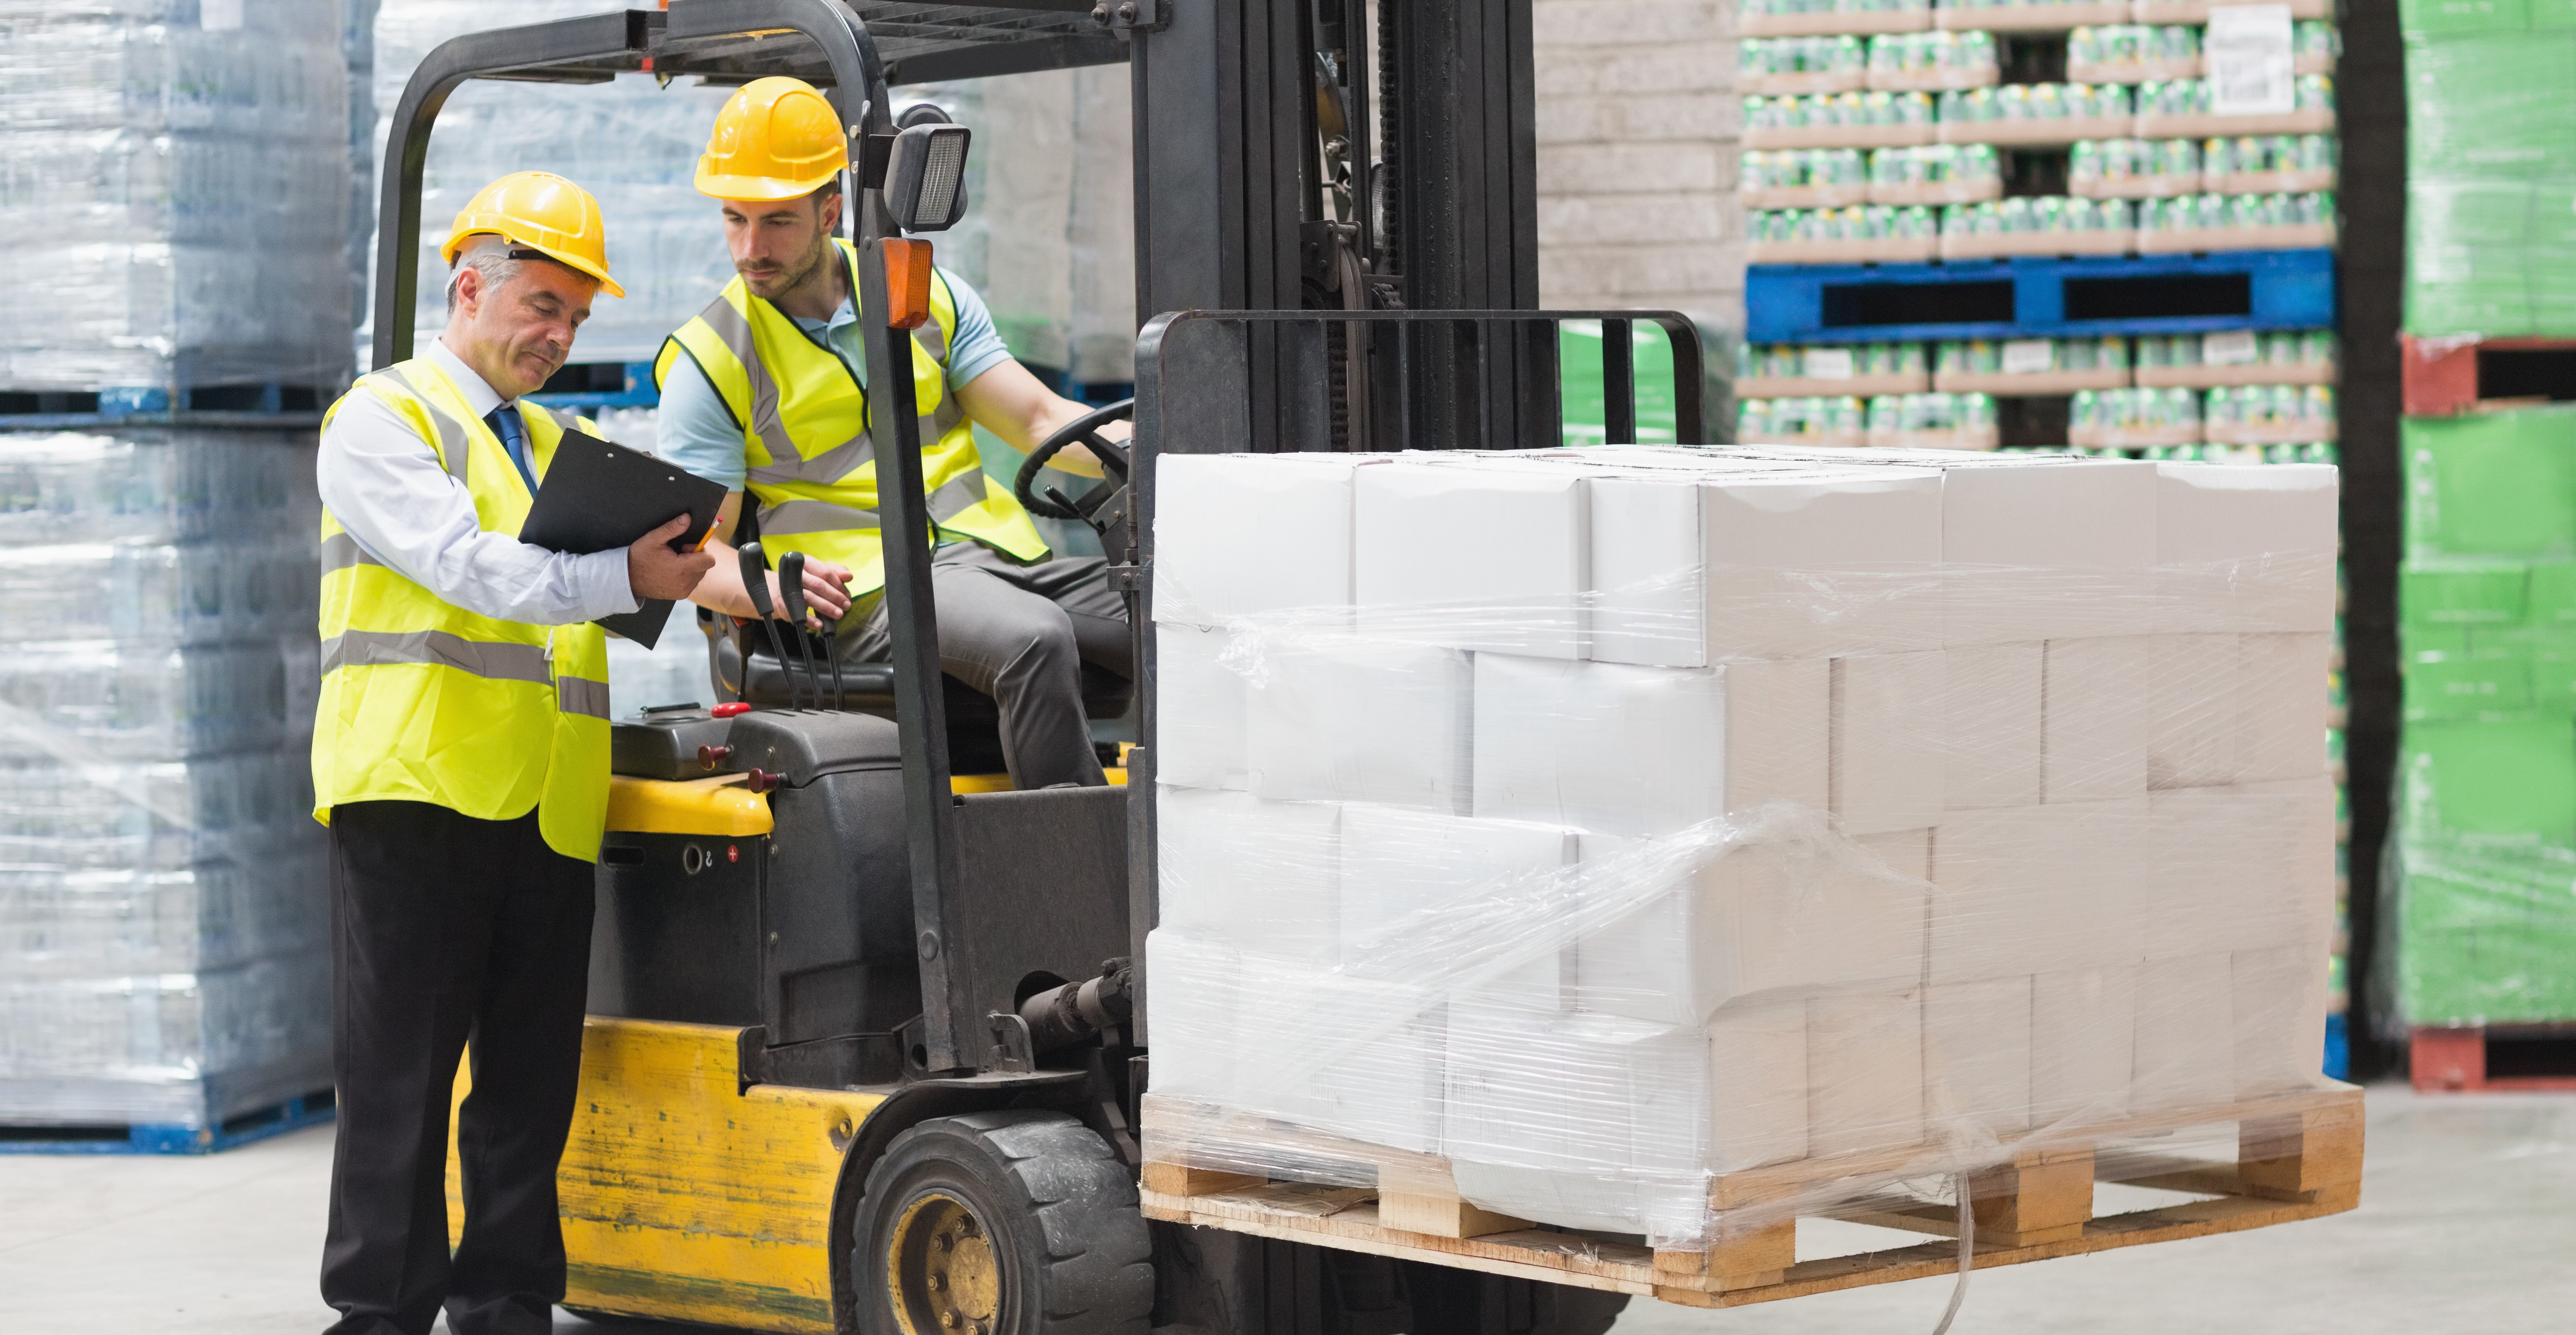 High demand for forklift operators due to the rise in online ordering